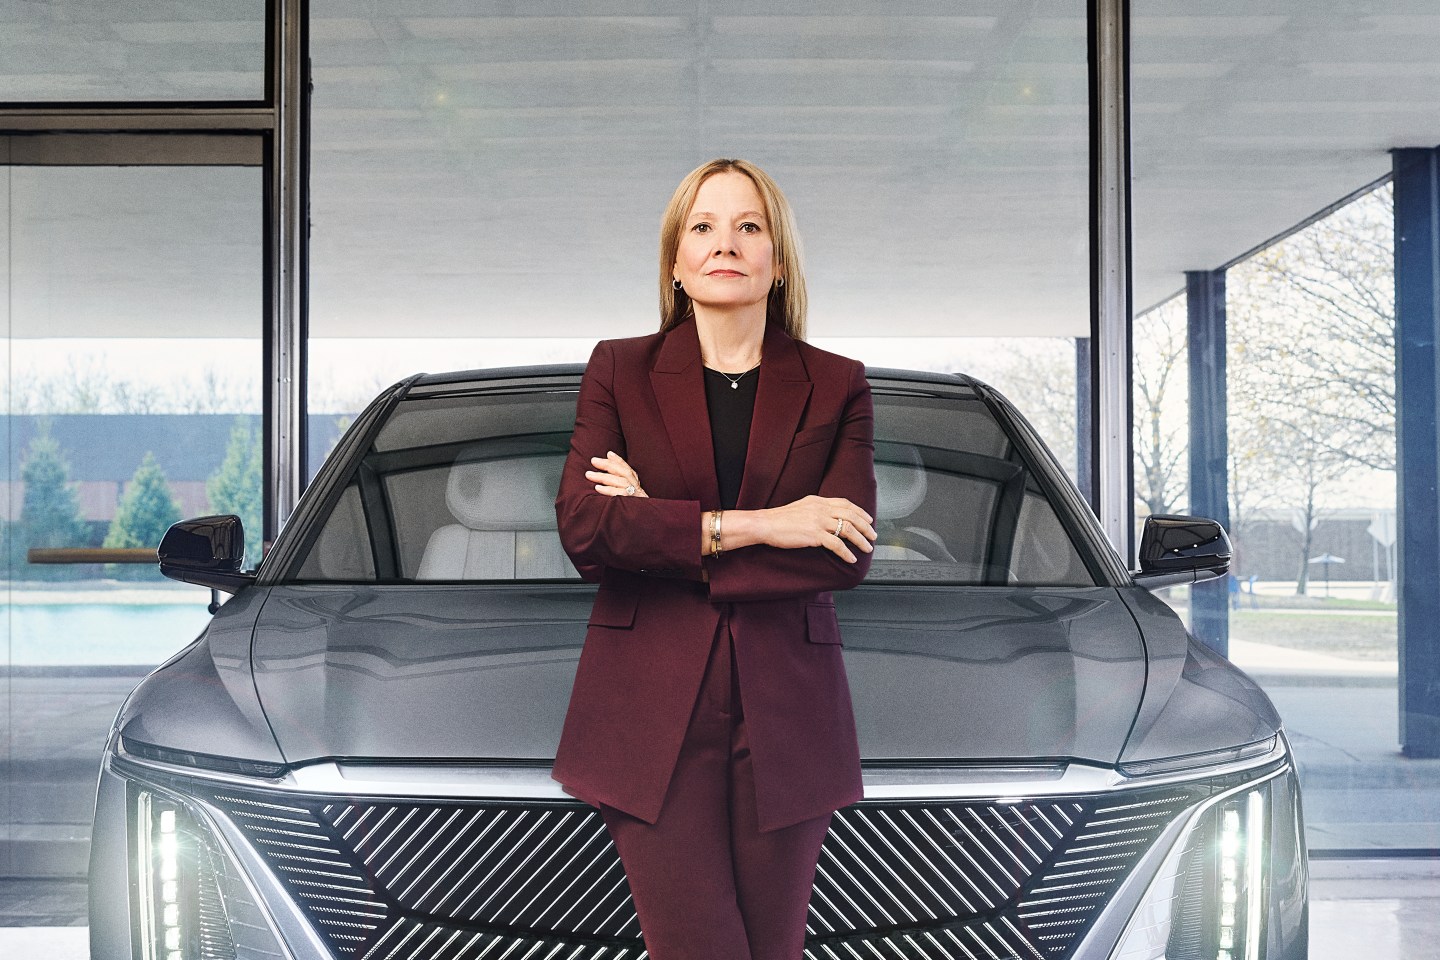 GM CEO Mary Barra photographed at GM&#039;s Design Center with the Cadillac LYRIQ ev on May 4, 2022 in Detroit, Michigan.
Spencer Lowell for Fortune